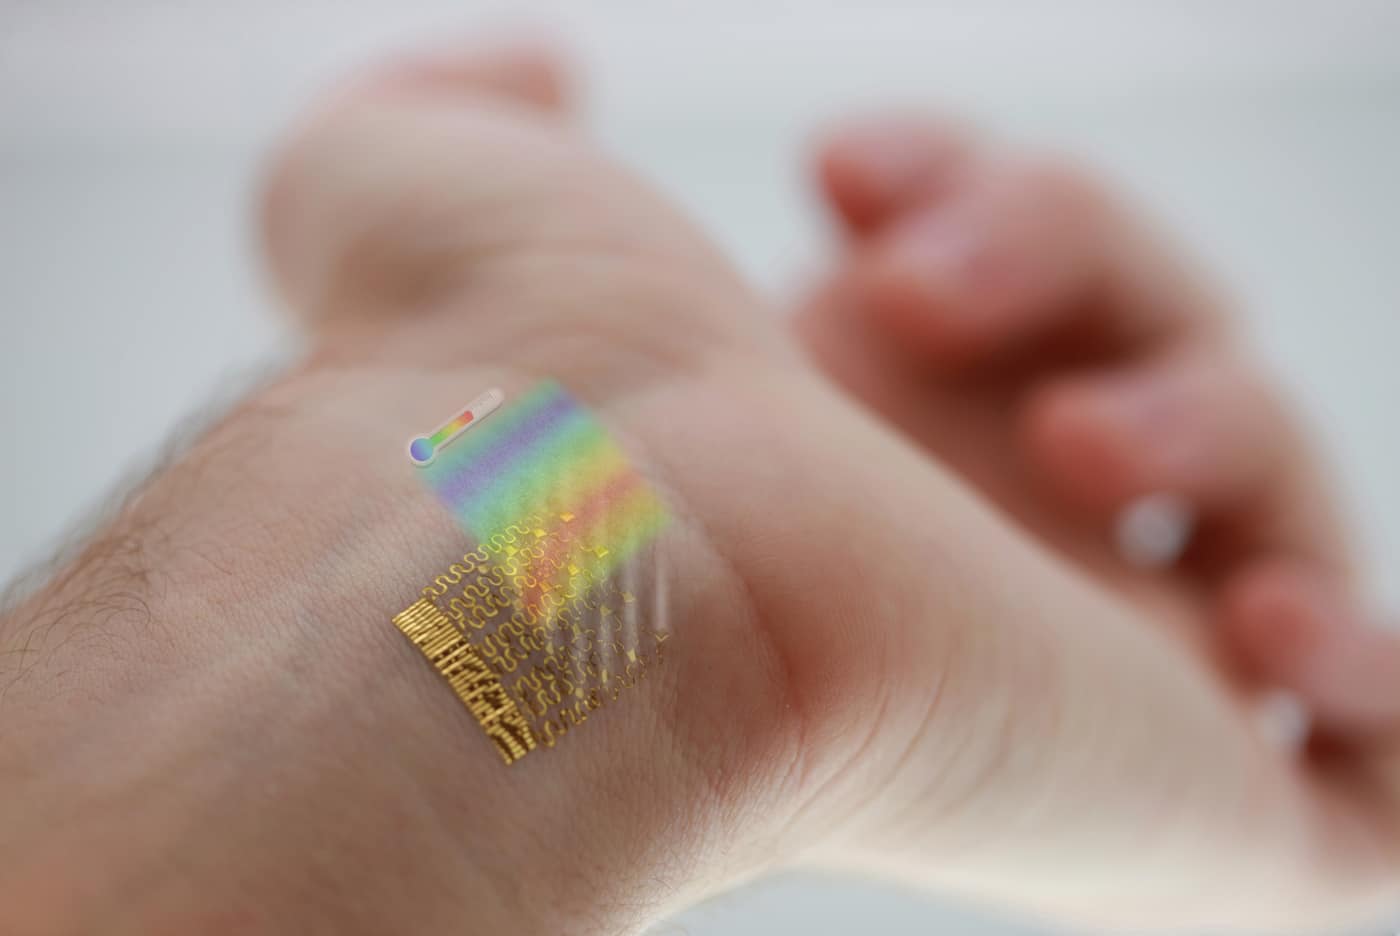 The High Tech Tattoo-Like Patch That Can Check Your Body Temperature